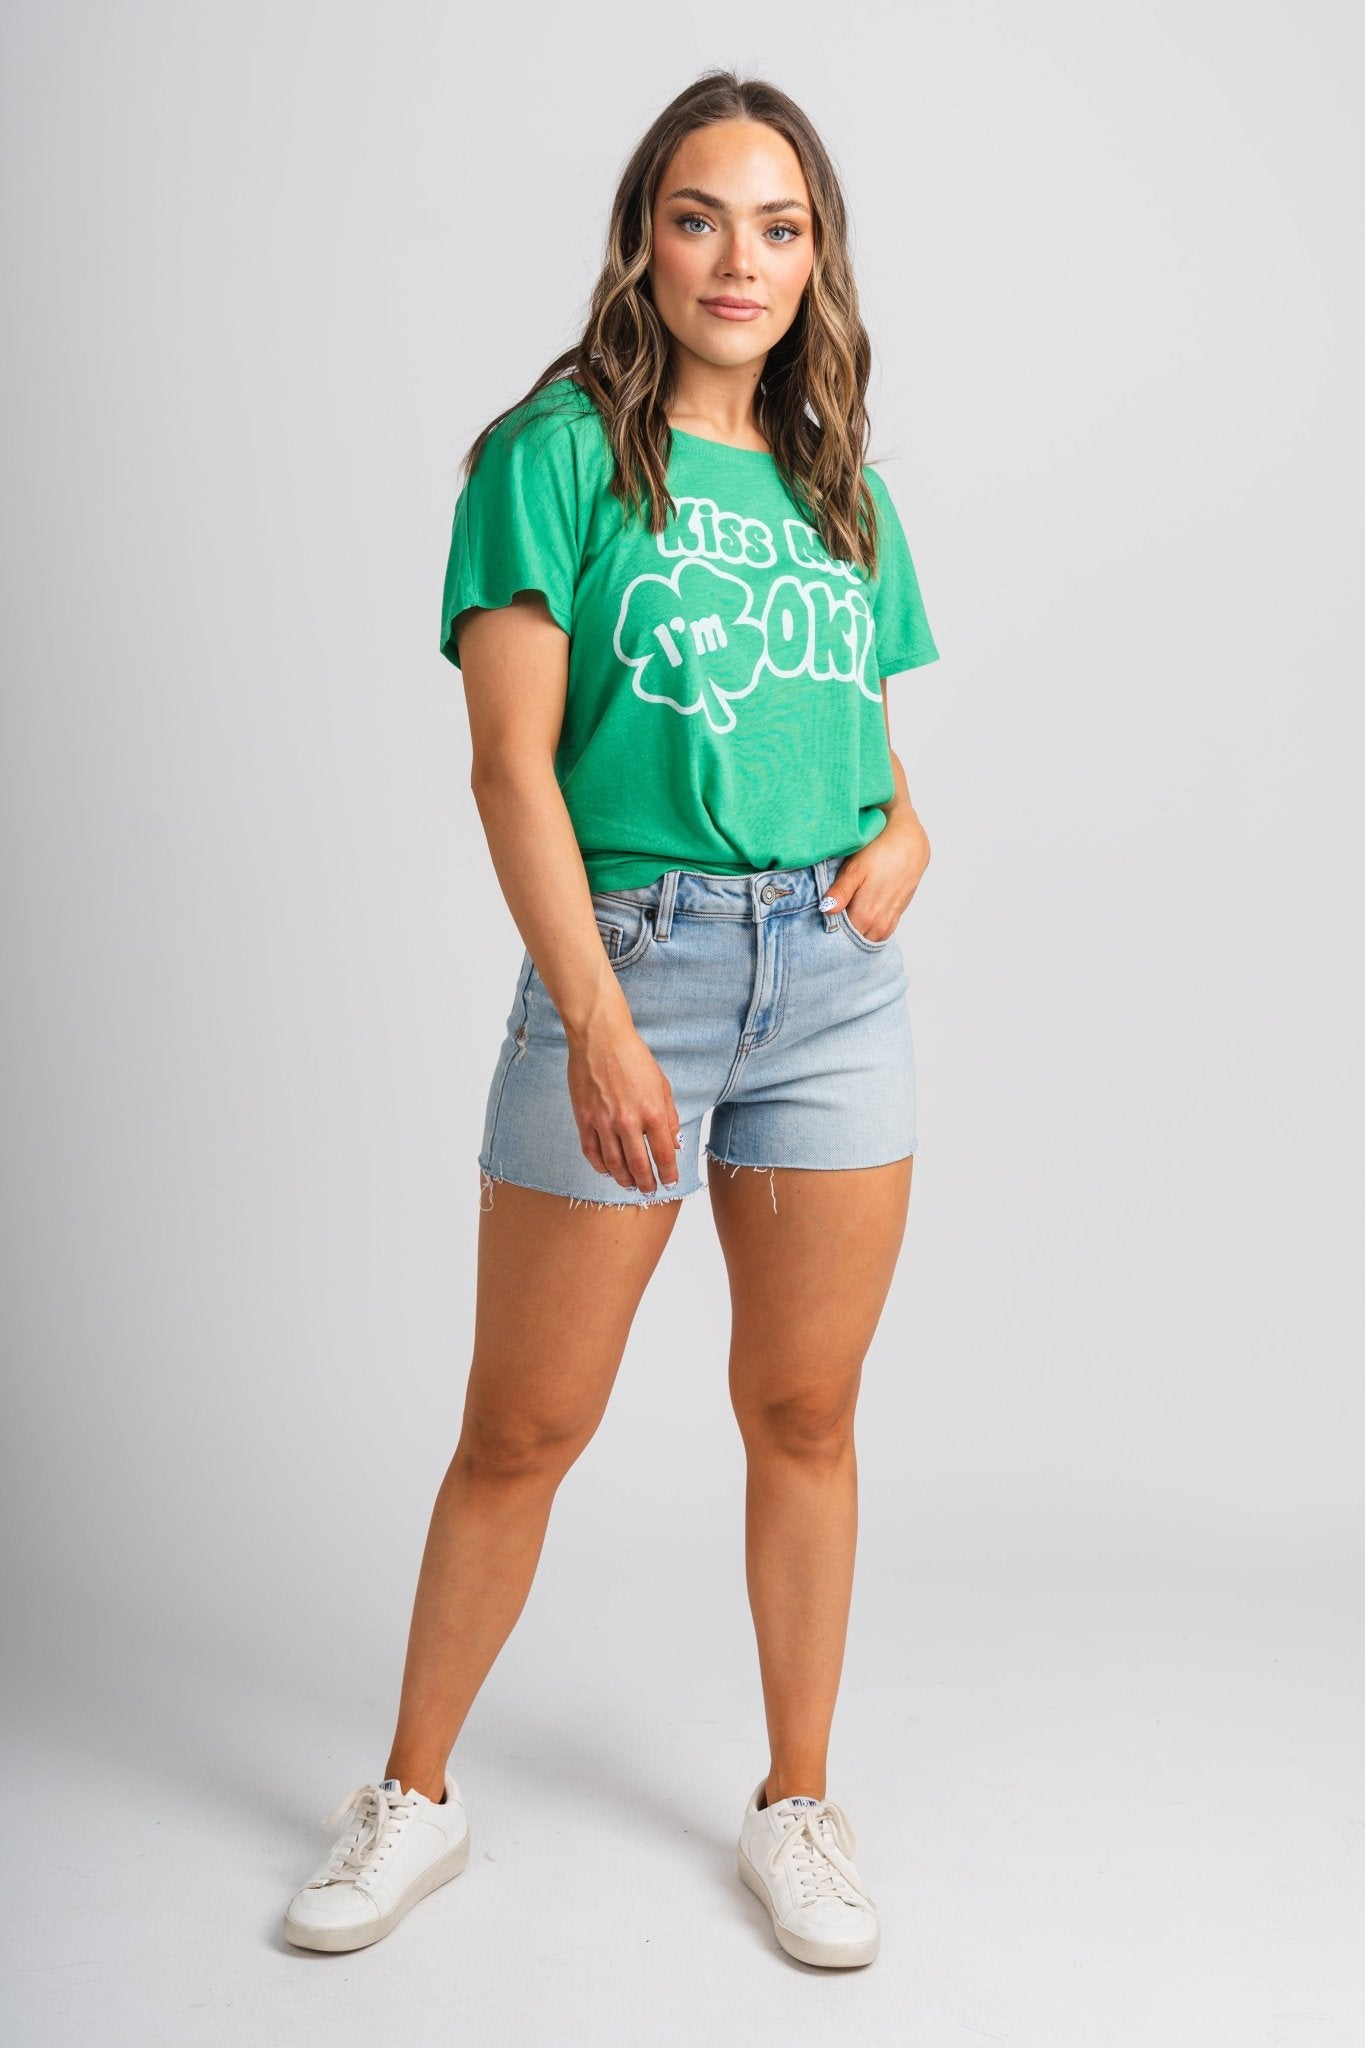 Kiss me I'm Okie t-shirt green - Cute St. Patrick's Day Outfits at Lush Fashion Lounge Boutique in Oklahoma City